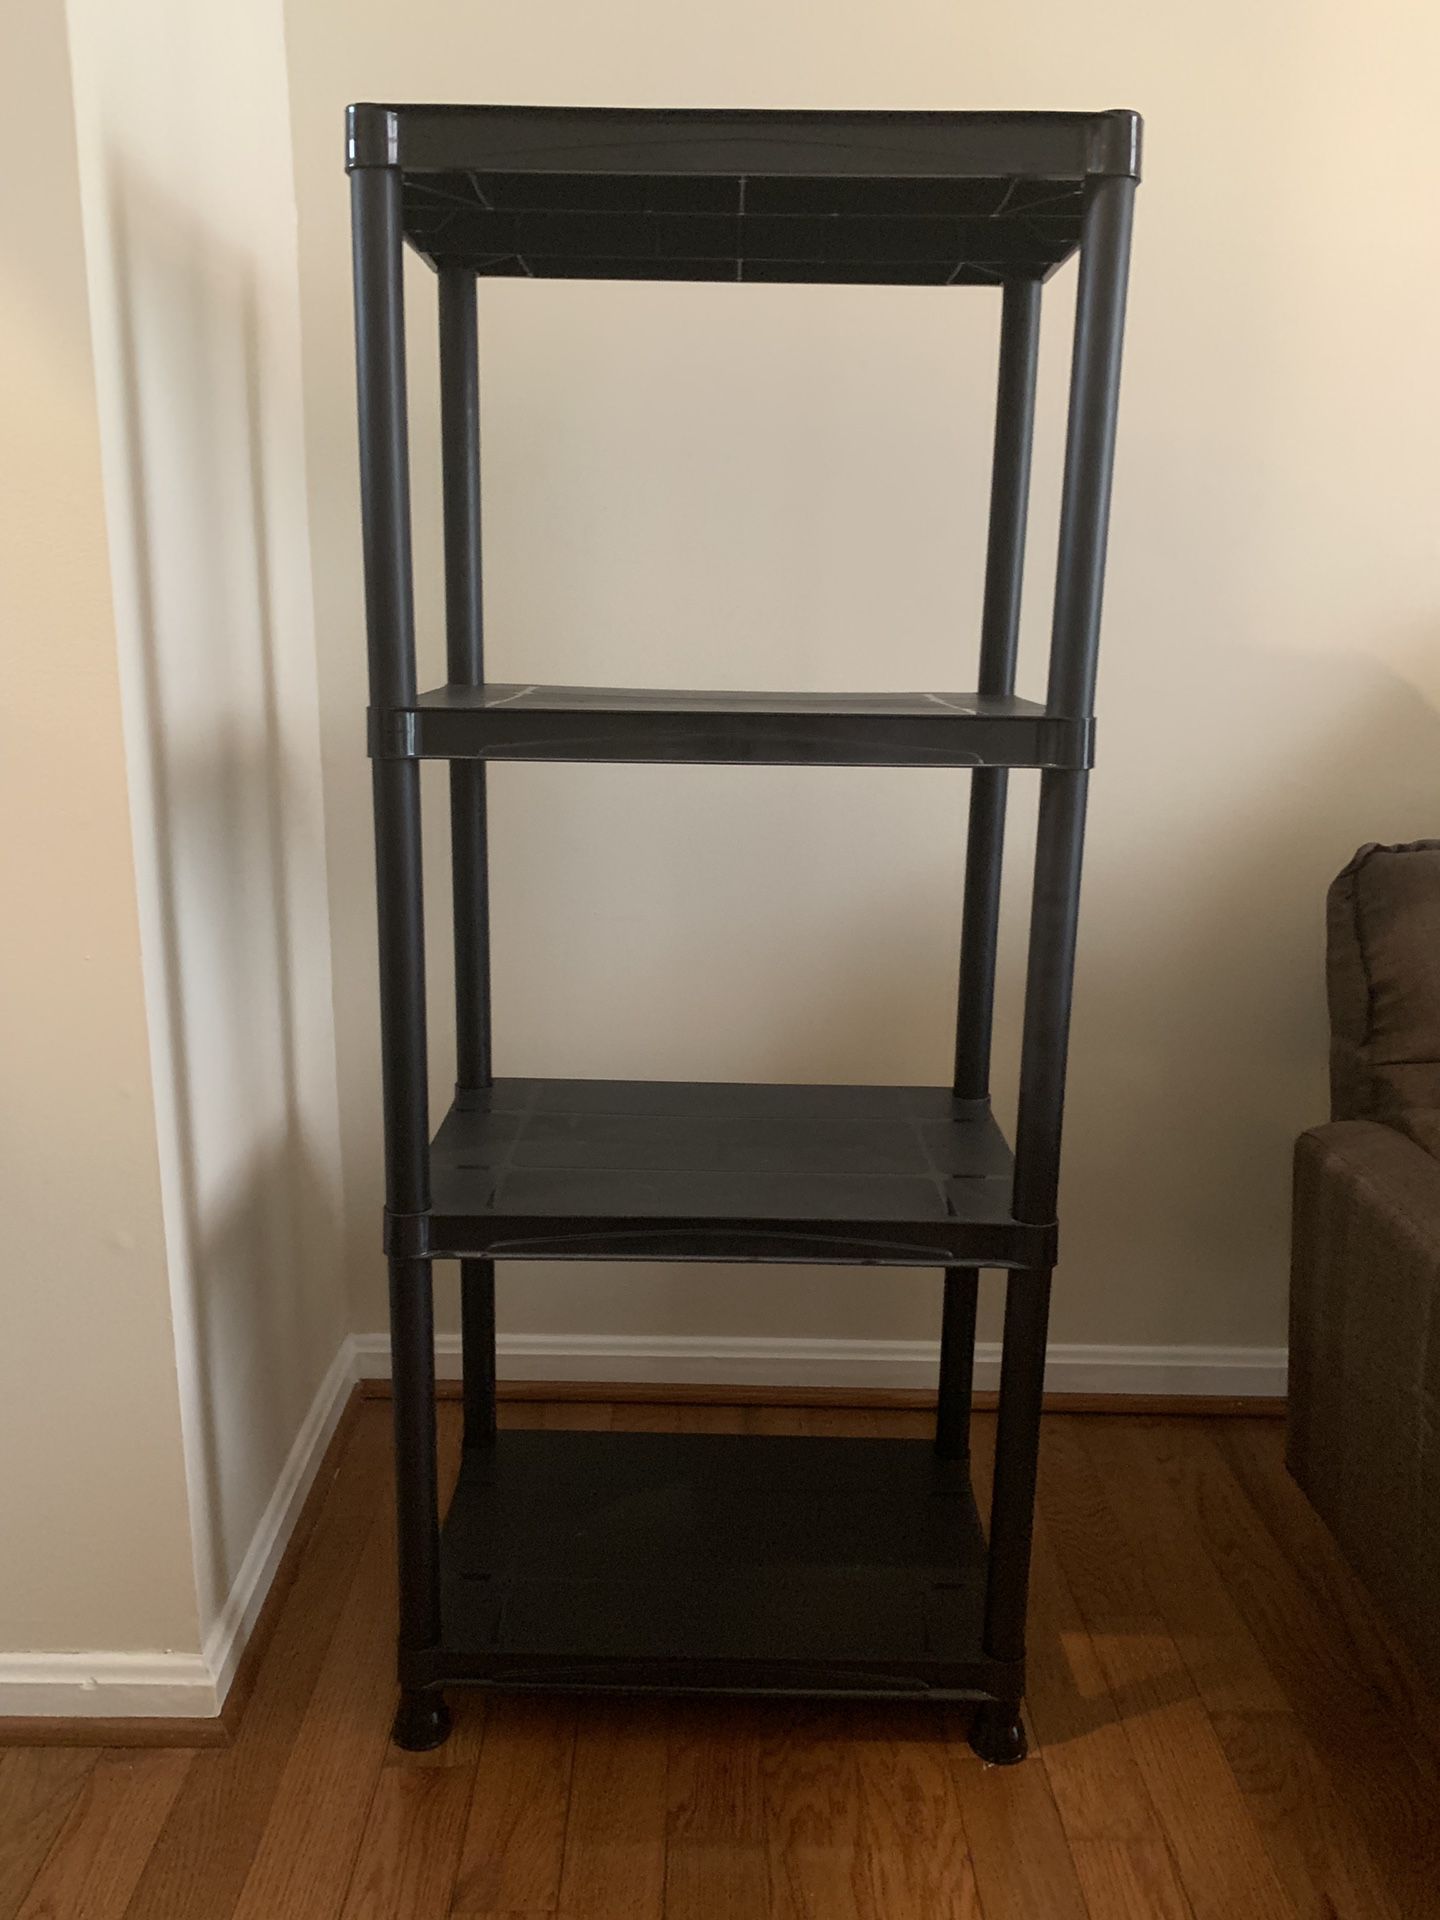 Book stand in black, in good condition.